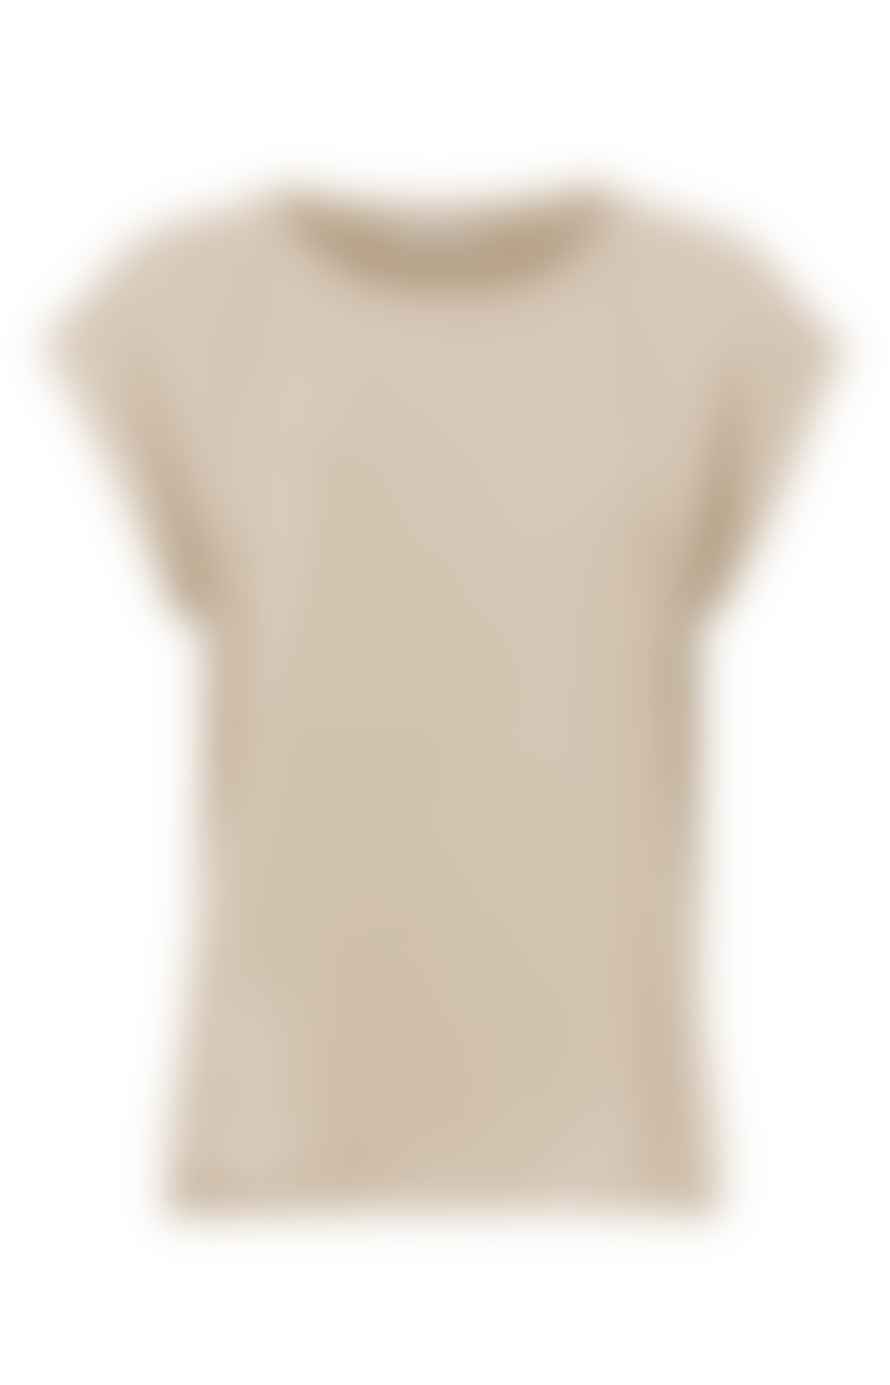 Yaya Top With Round Neck In Fabric Mix | White Pepper Beige